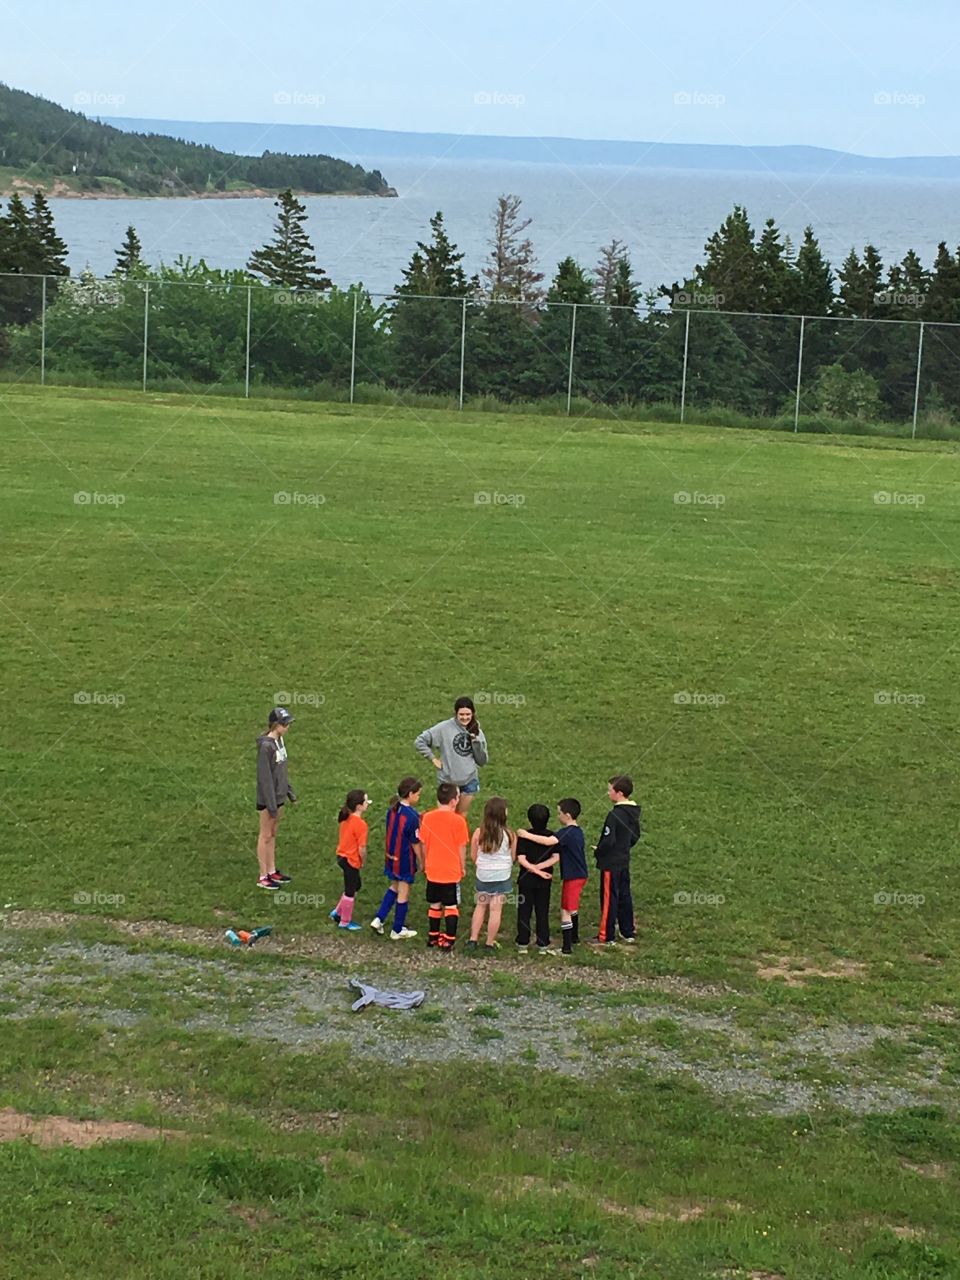 Kids at soccer practice learning from their coach. Team spirit. 